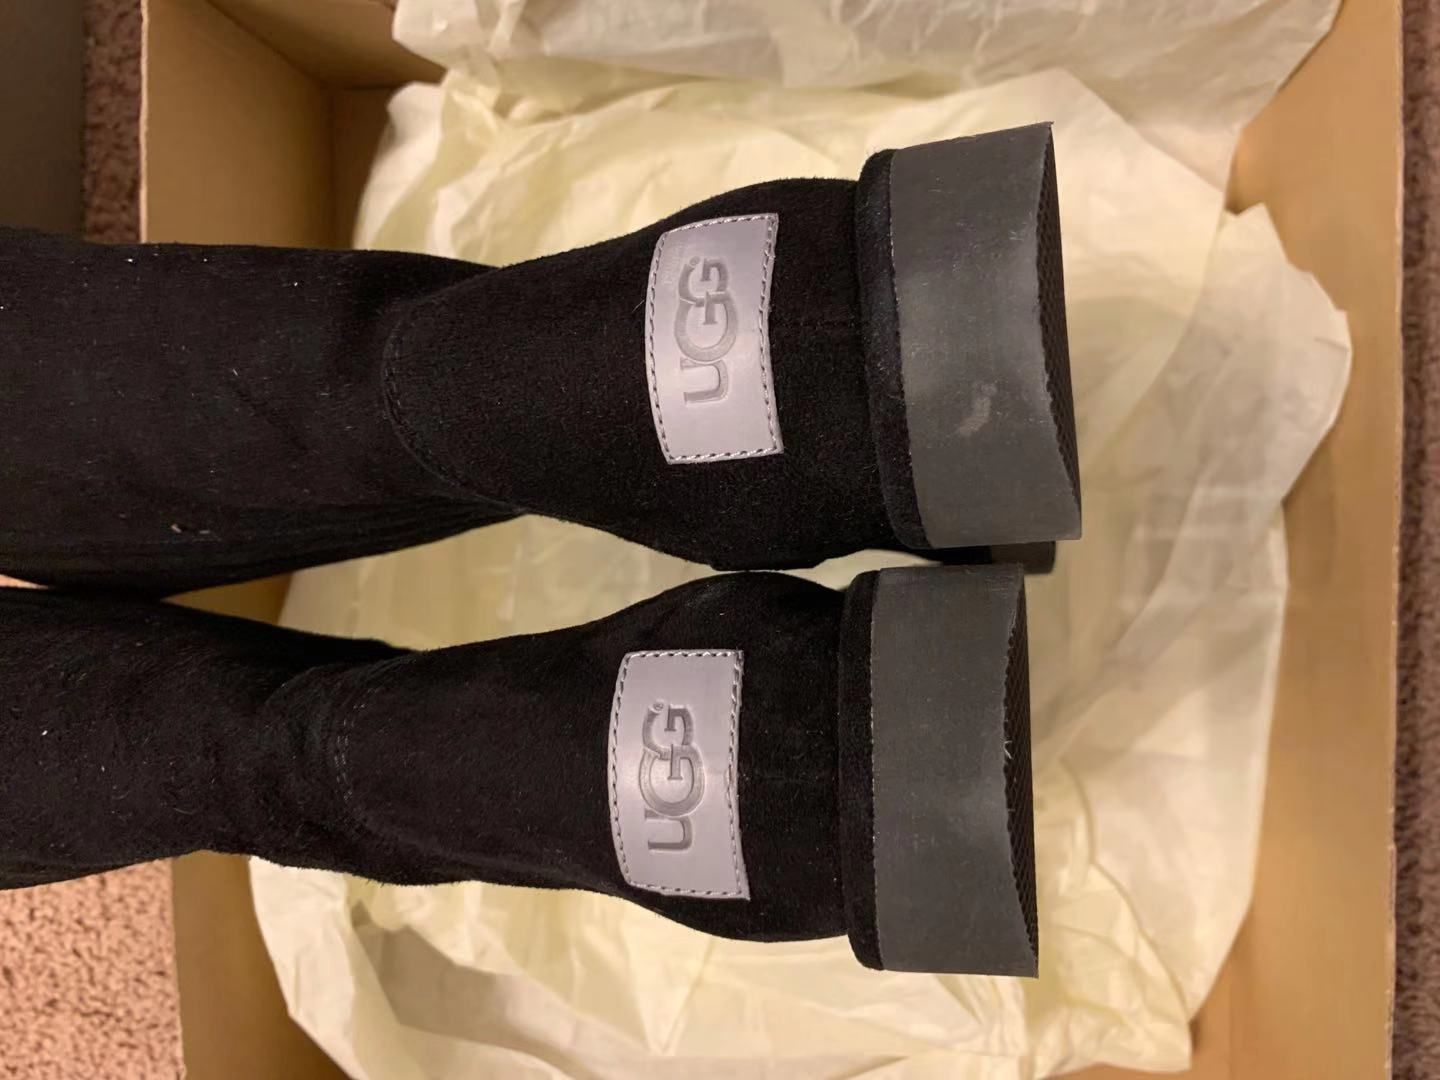 Brand new UGG BOOTS, size 7